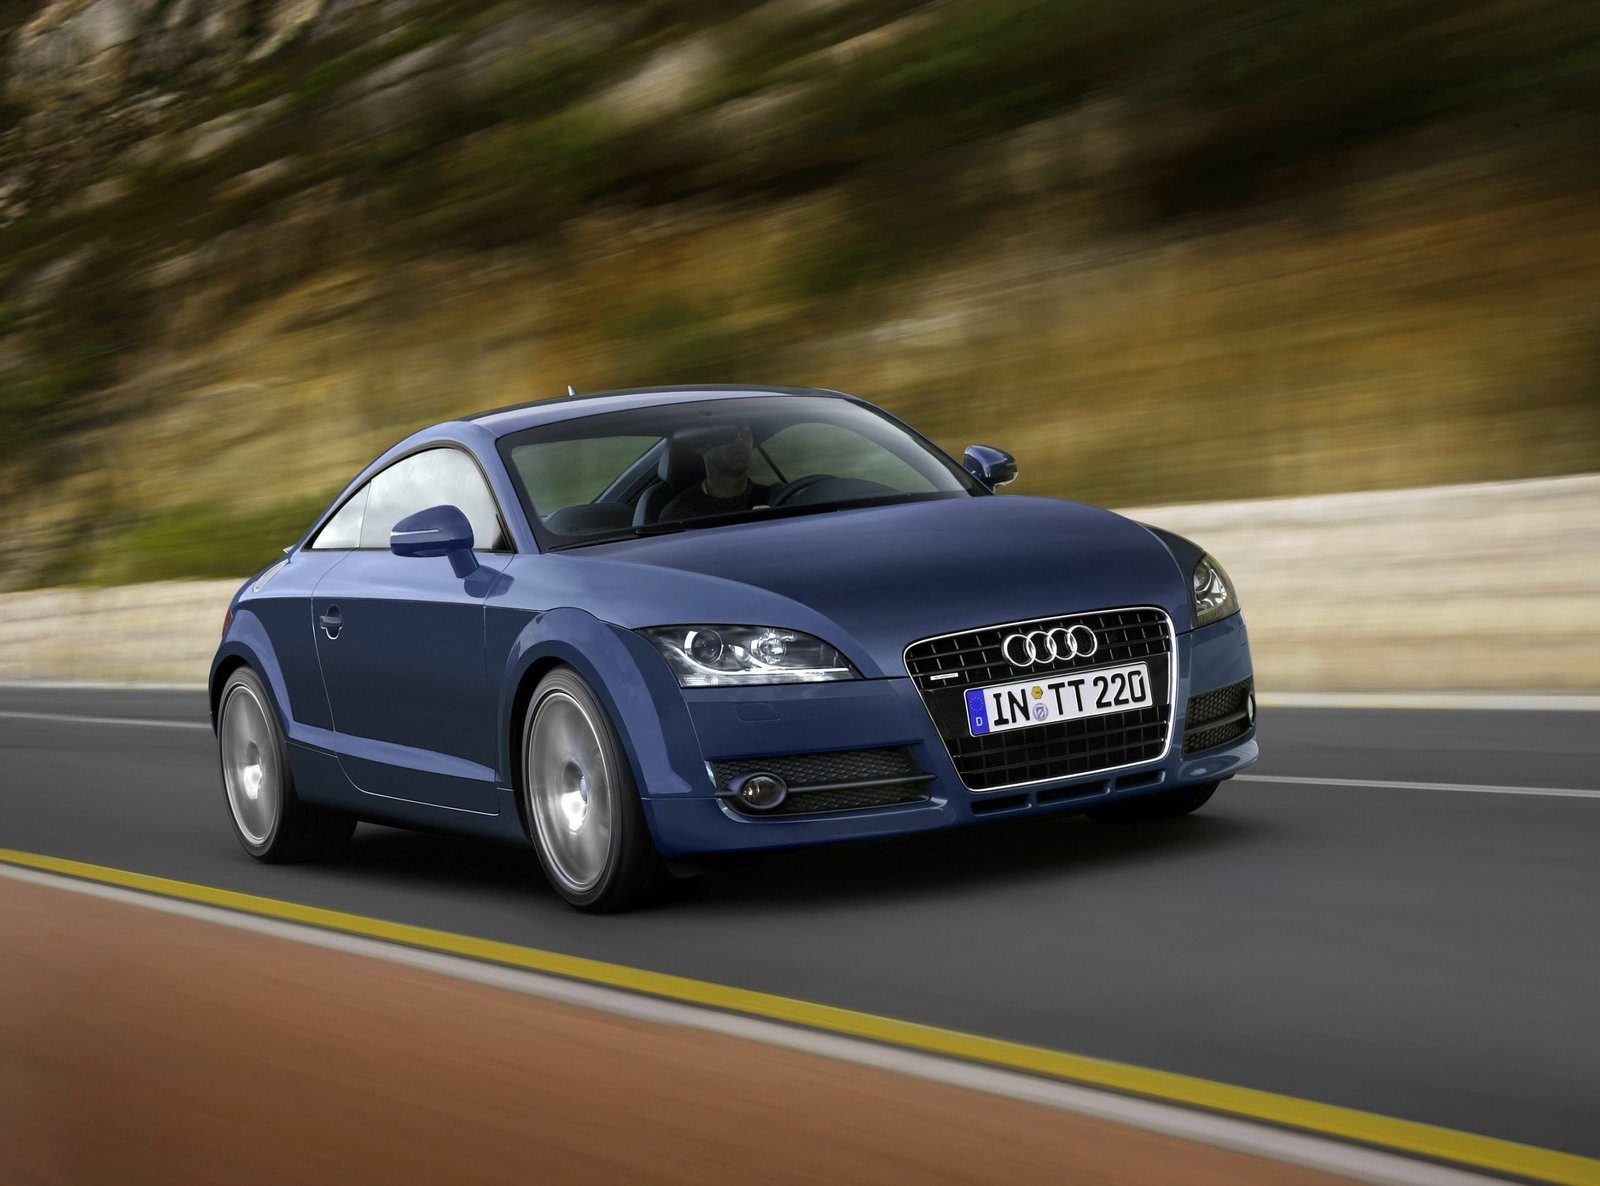 Audi TT Coupé, second generation (pictured in motion).